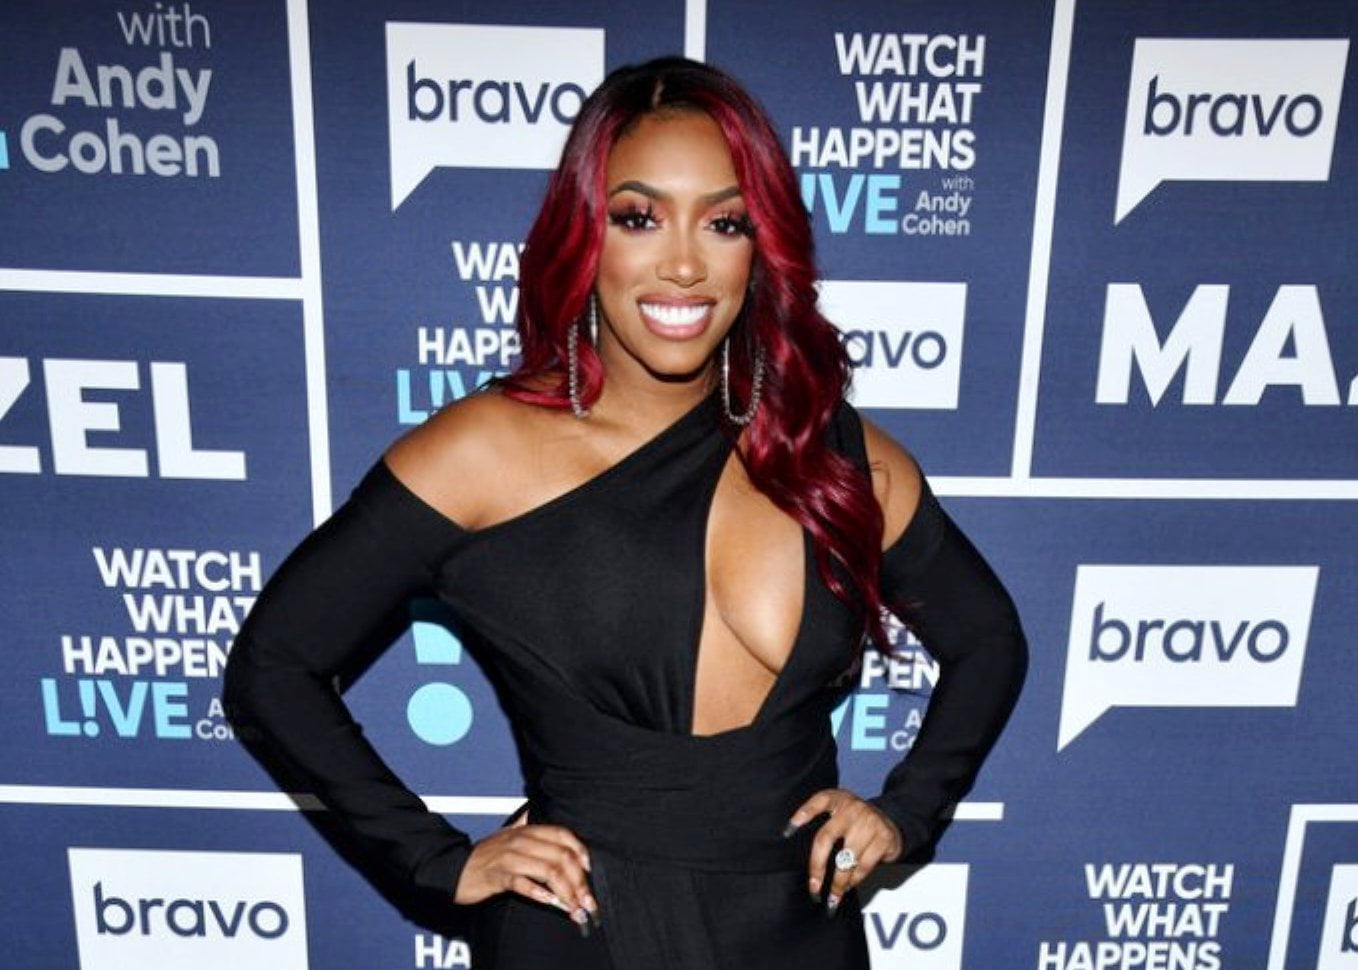 Porsha Williams Addresses Her Family Affair - Check Out Her Post Below